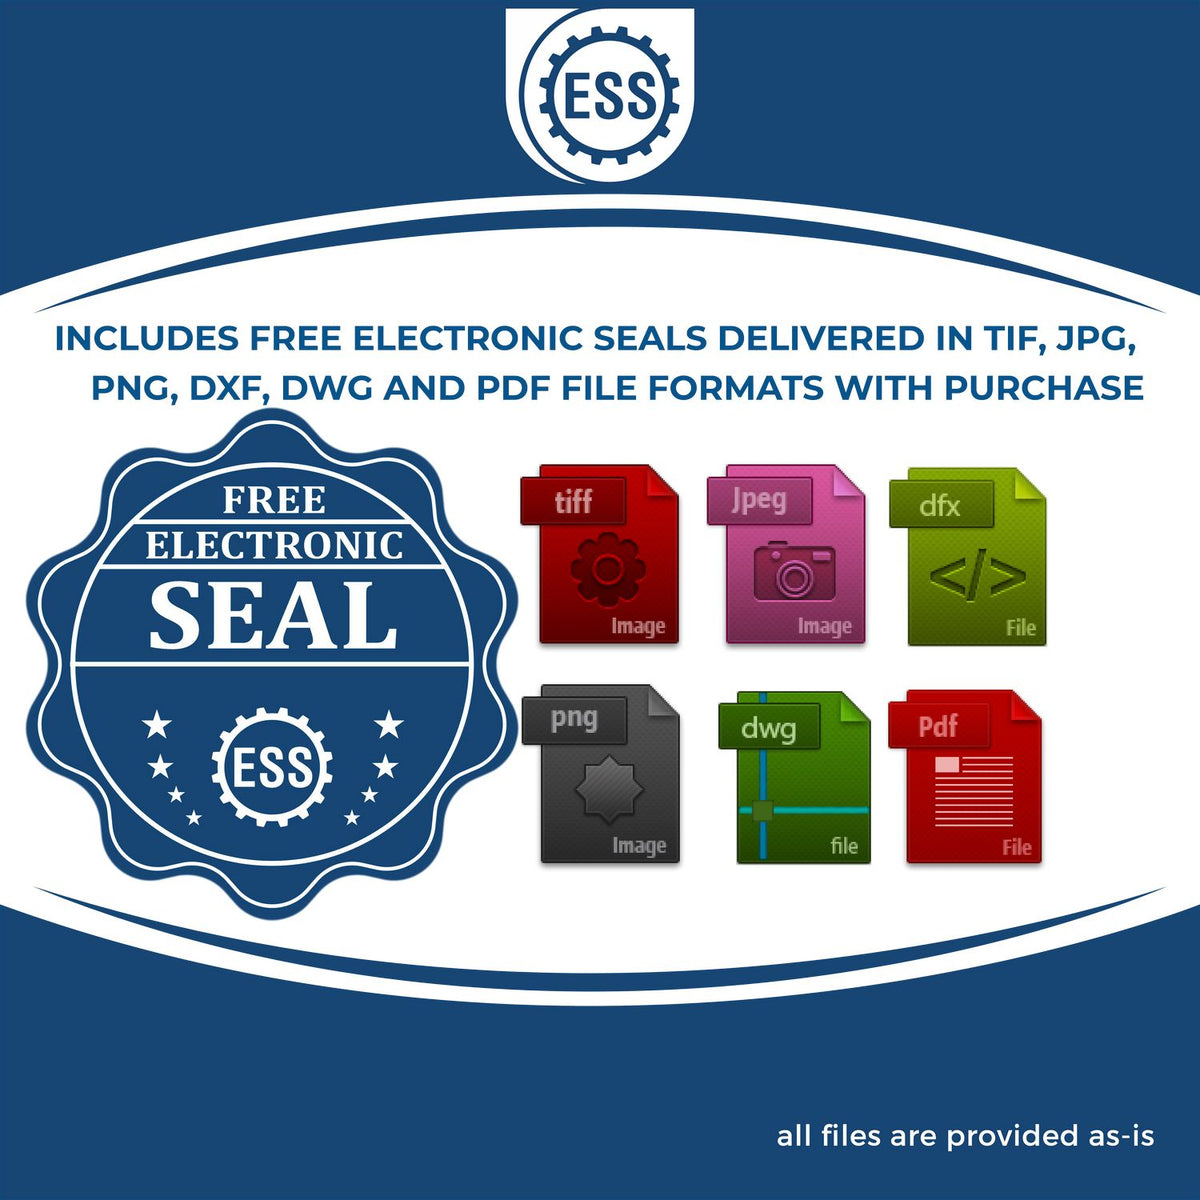 An infographic for the free electronic seal for the Slim Pre-Inked Minnesota Professional Engineer Seal Stamp illustrating the different file type icons such as DXF, DWG, TIF, JPG and PNG.